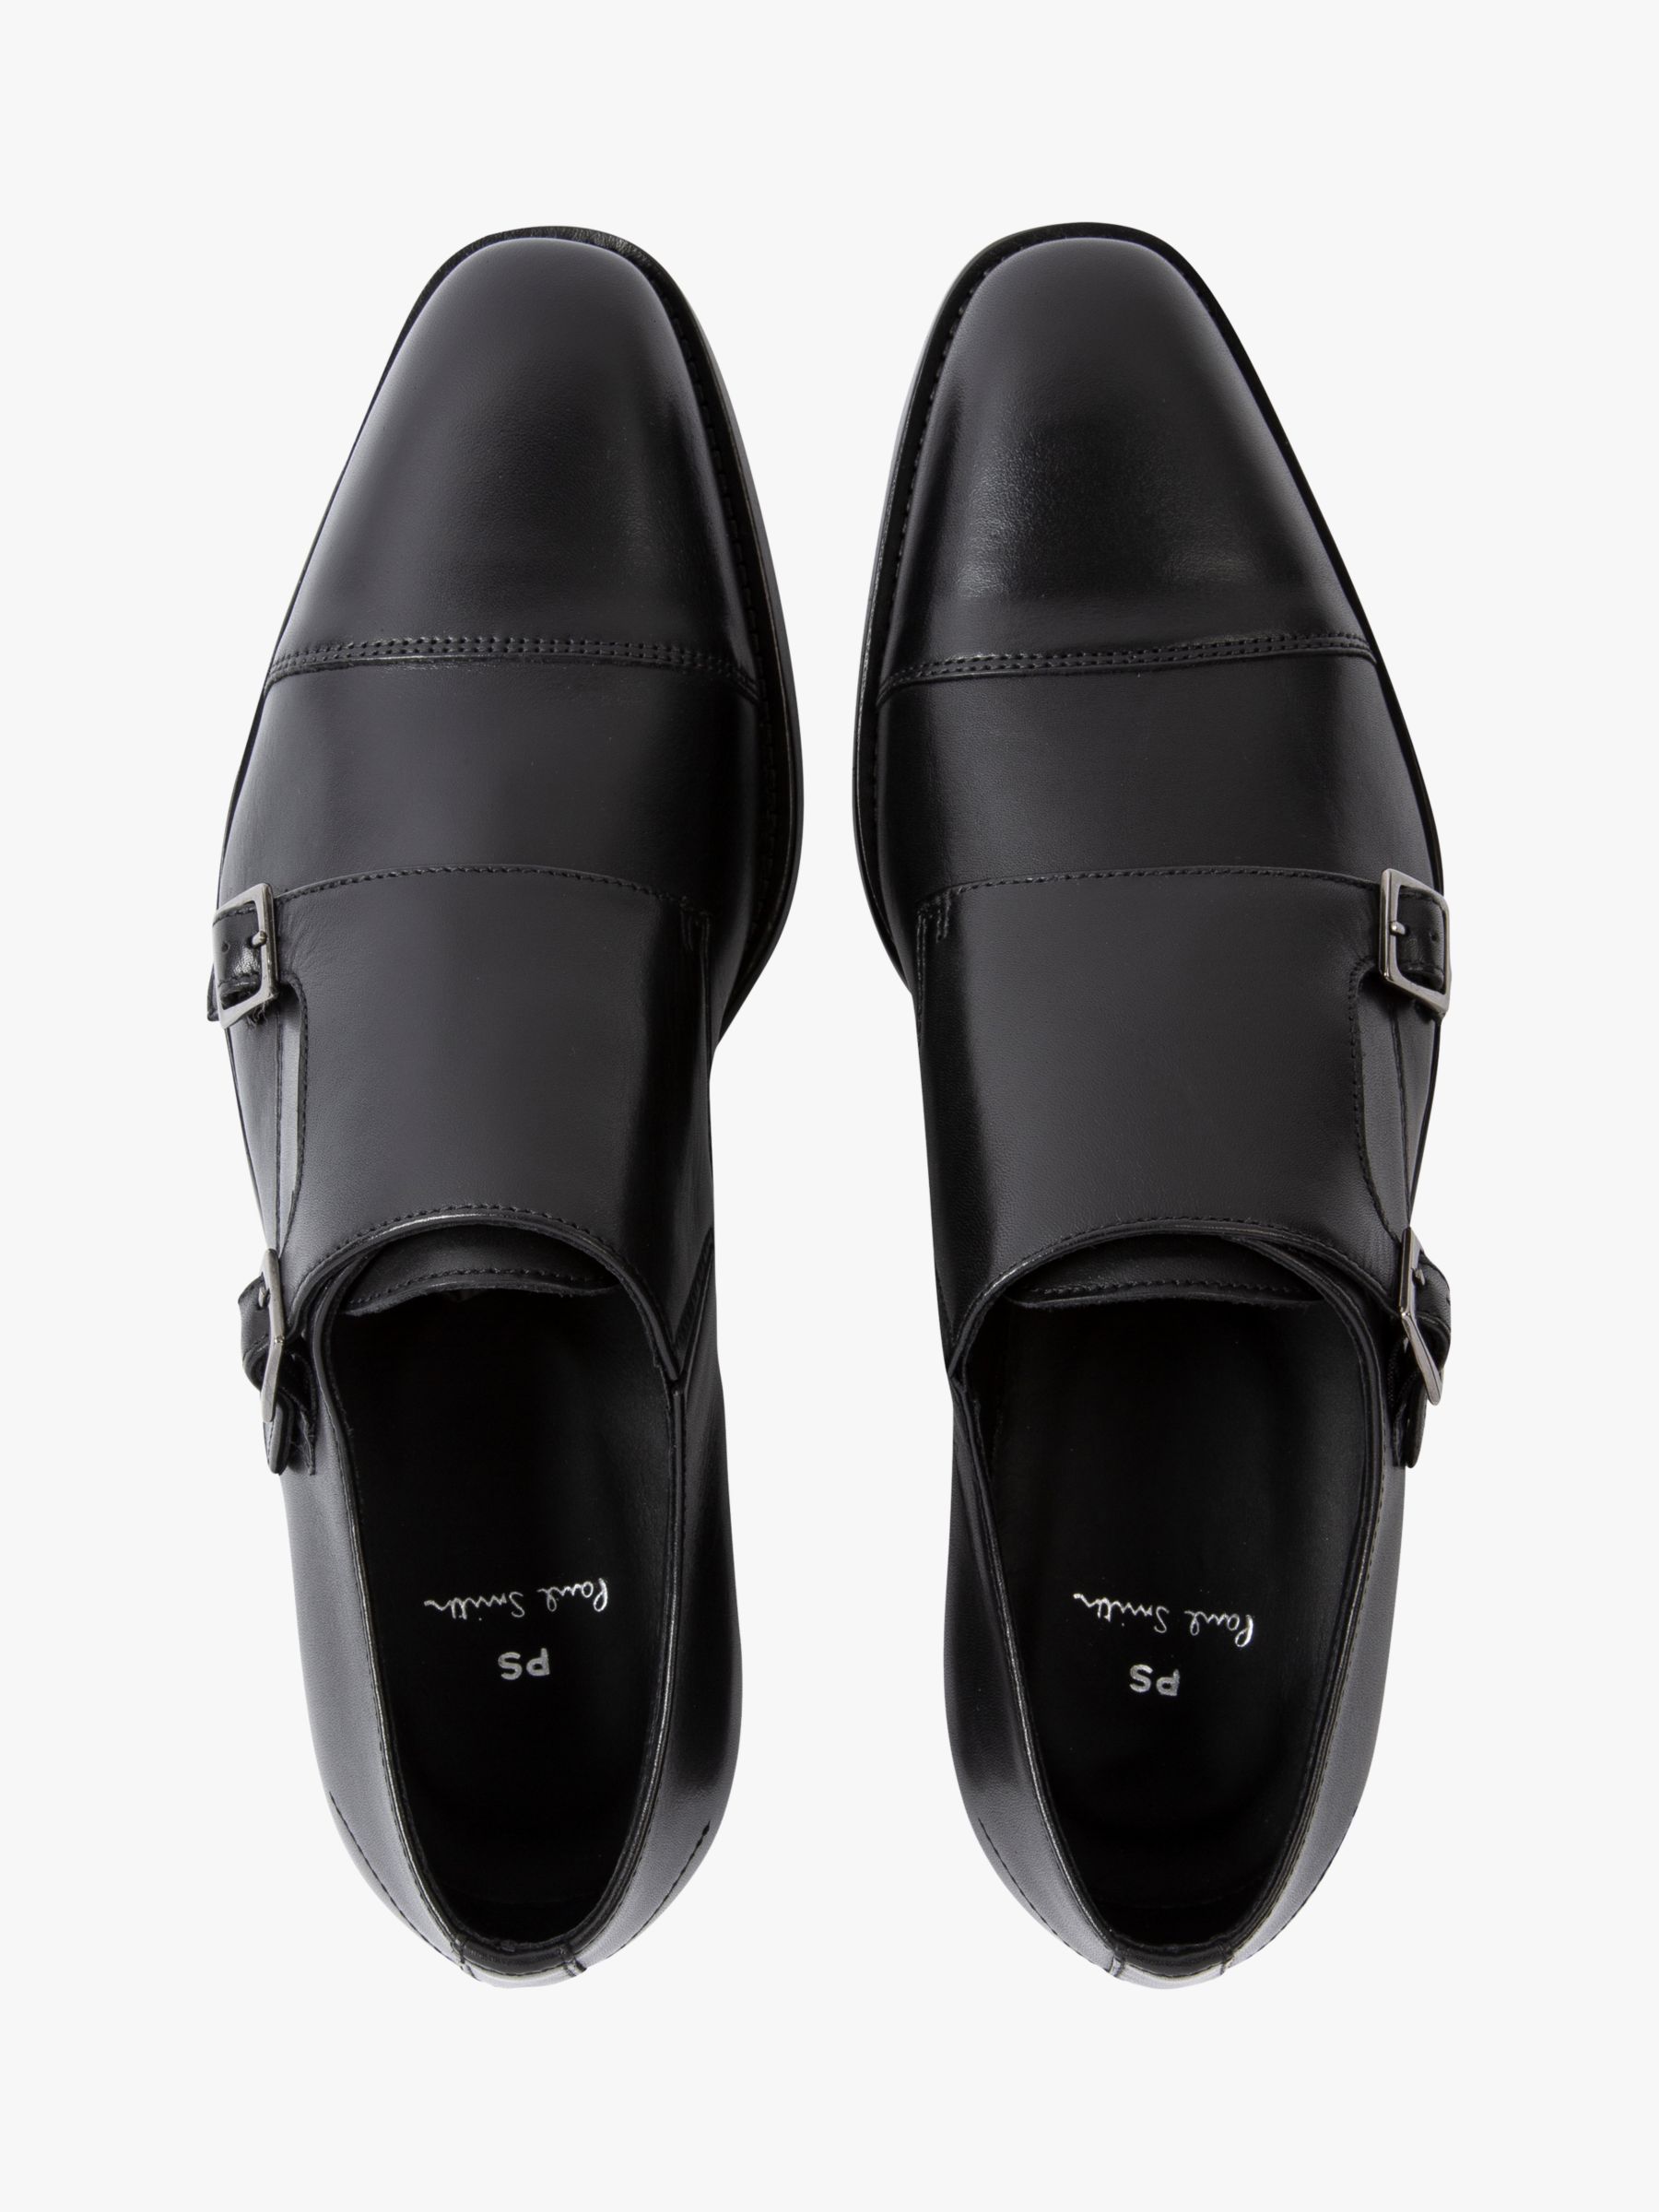 paul smith monk shoes